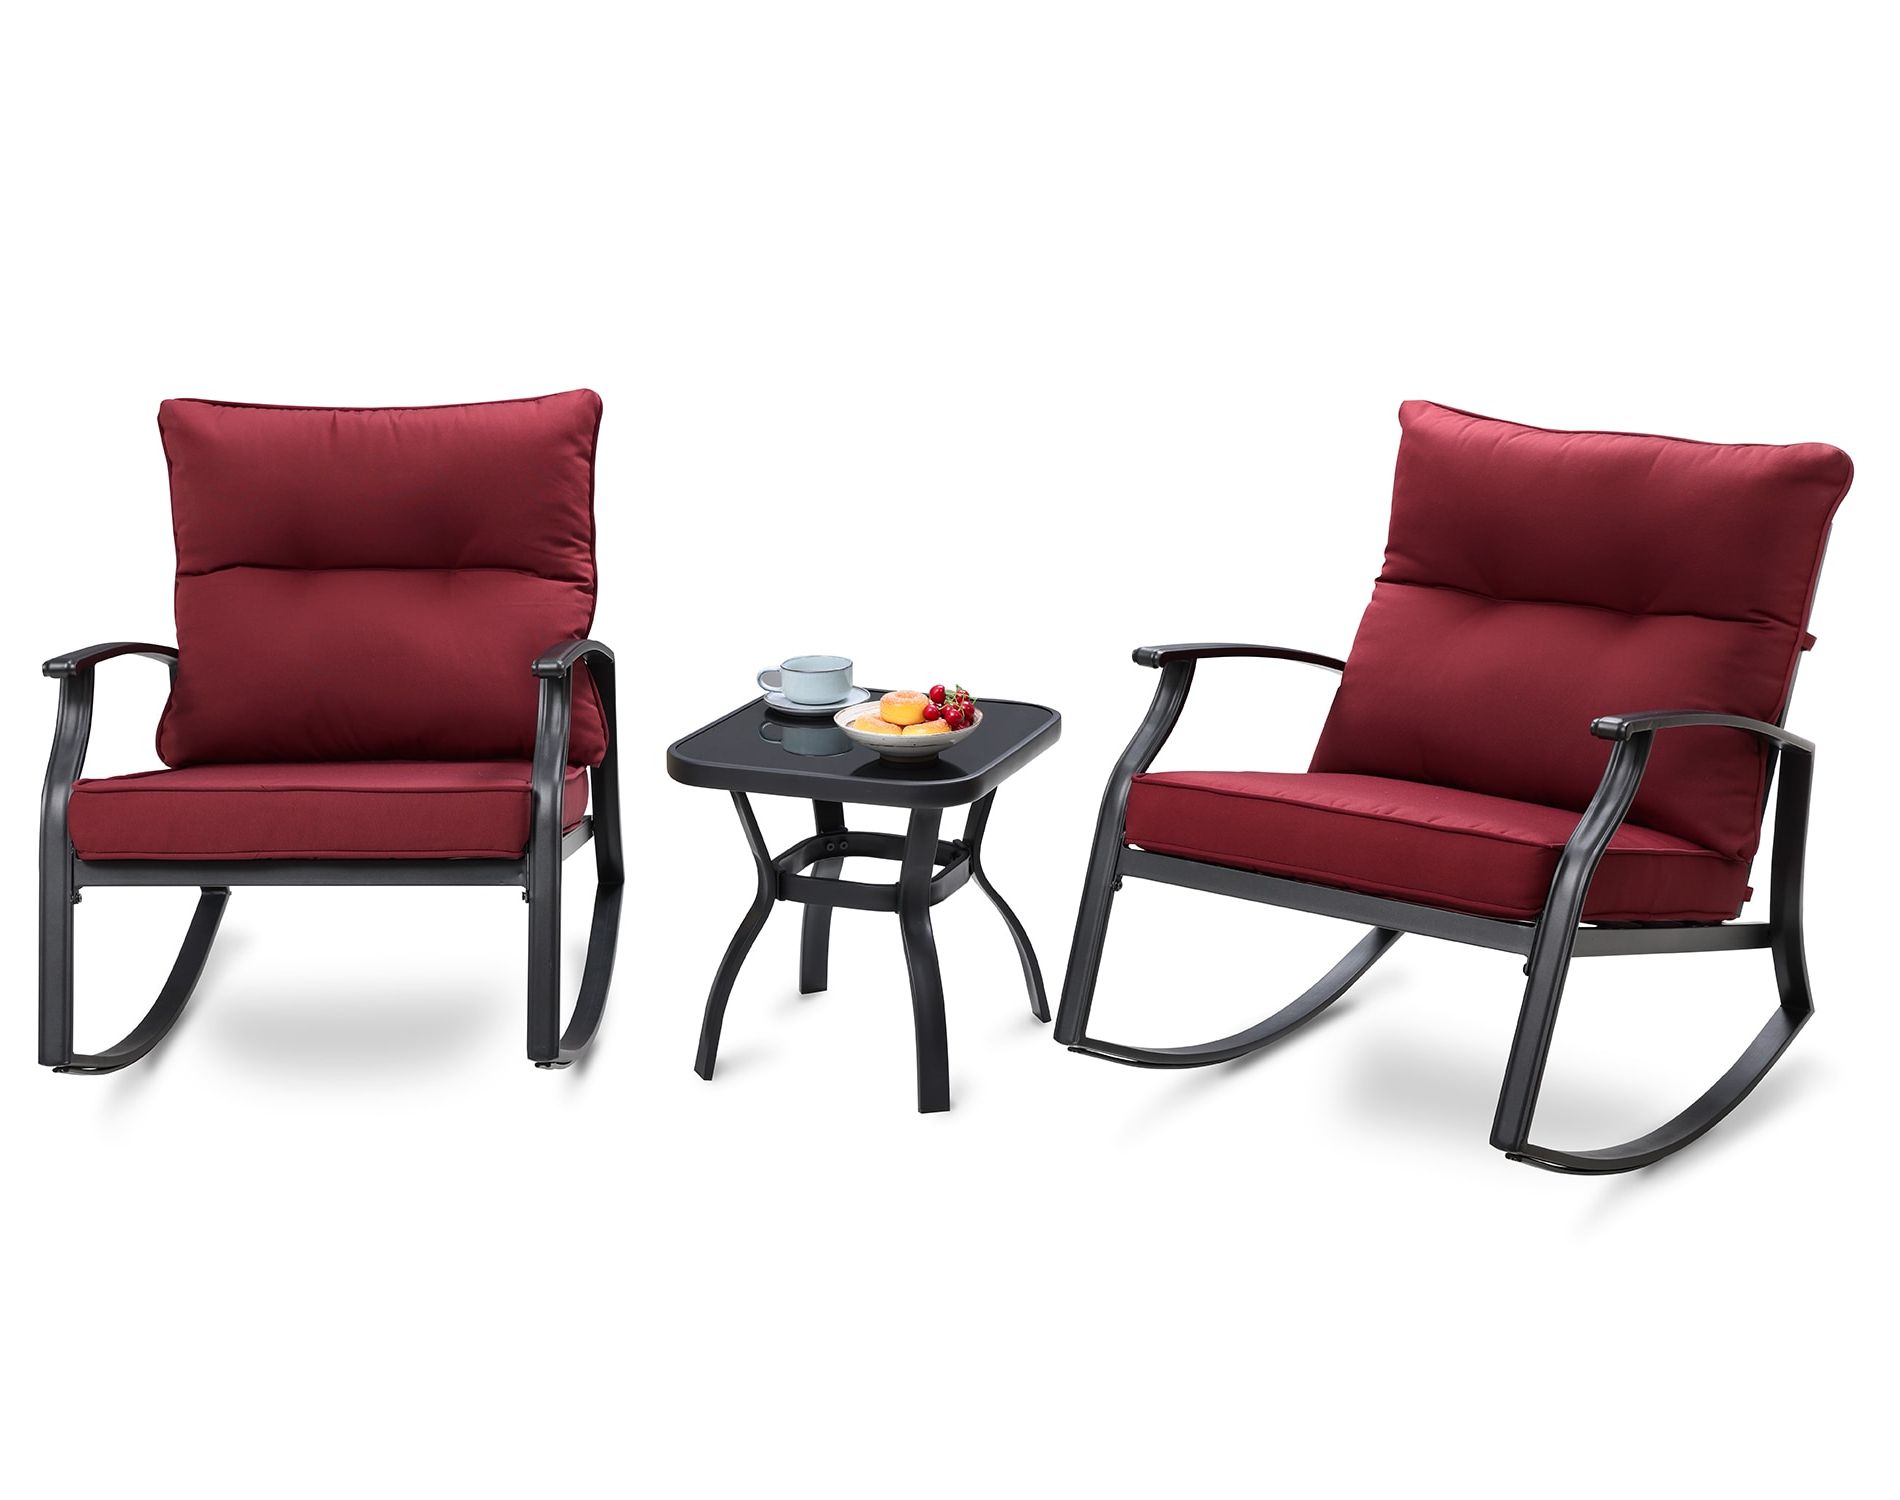 3 Piece Cushion Rocking Chair Set With Regard To Newest Clihome Patio Rocking Chair 3 Piece Patio Conversation Set With Red Cushions  In The Patio Conversation Sets Department At Lowes (Photo 14 of 15)